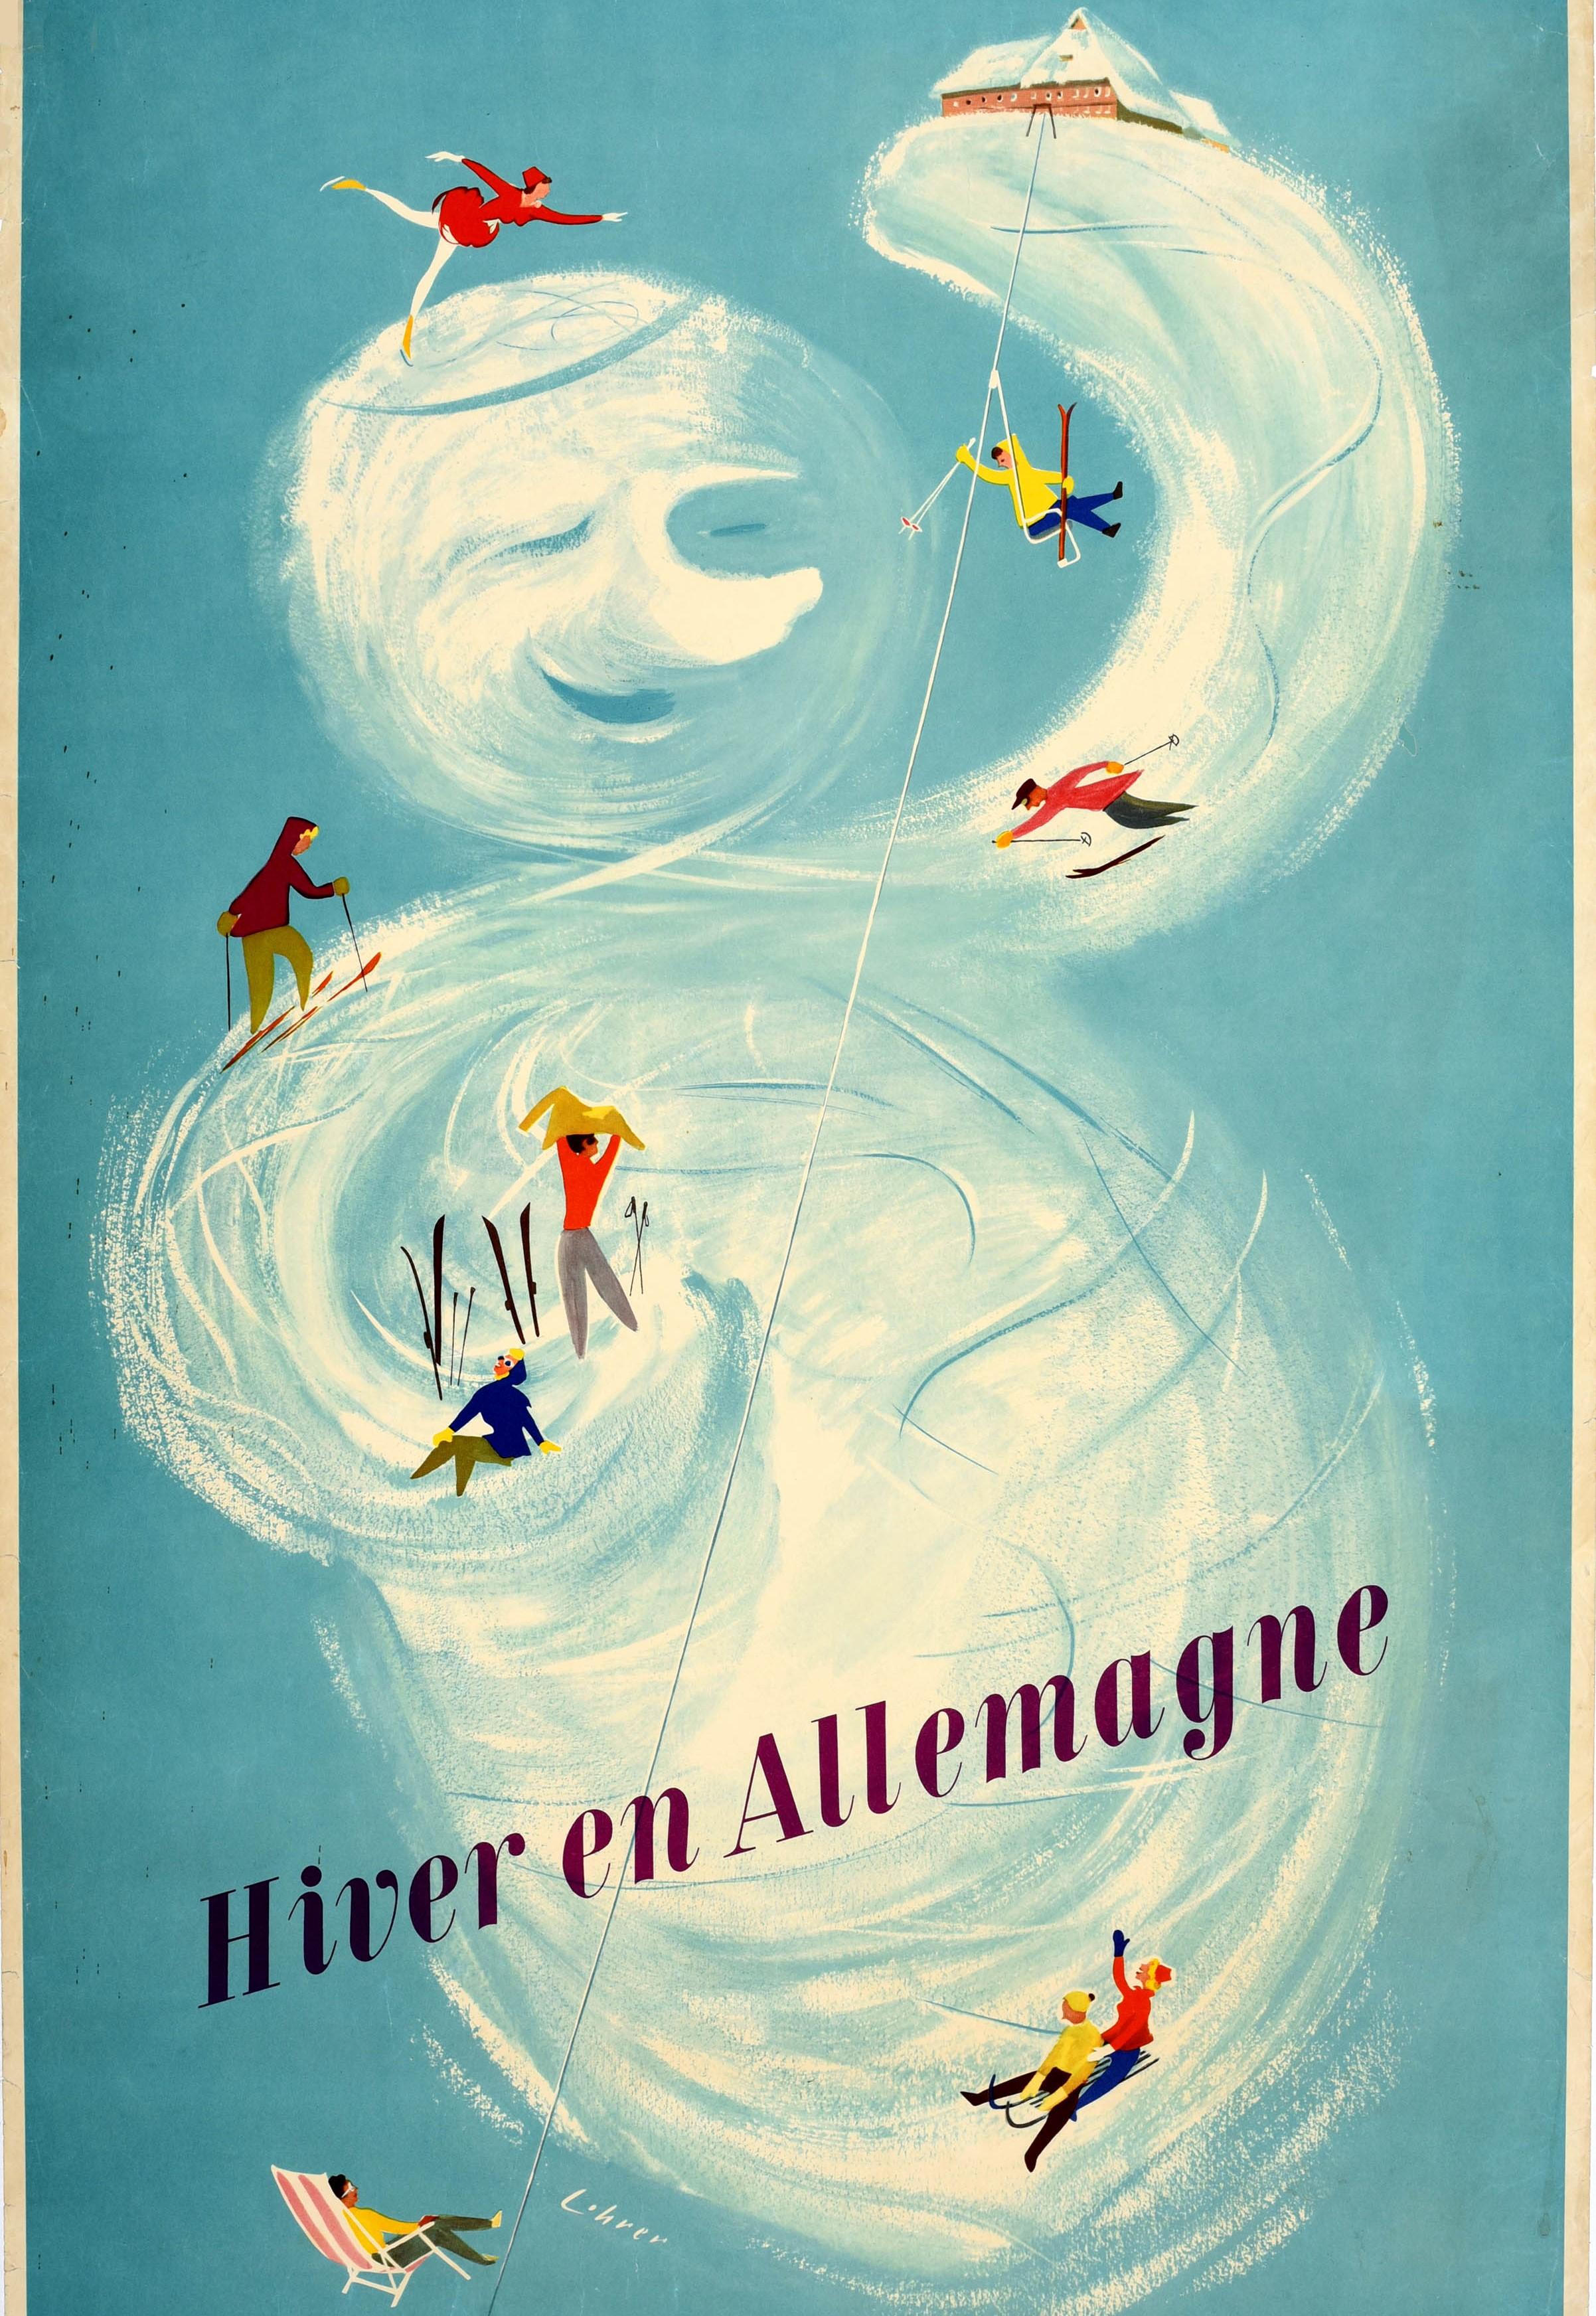 Original vintage ski and winter sport travel poster - Winter in Germany / Hiver en Allemagne - featuring a fun design by Hanns Lohrer (1912-1995) depicting people enjoying winter sports and skiing on a snowy ski slope in the shape of a smiling